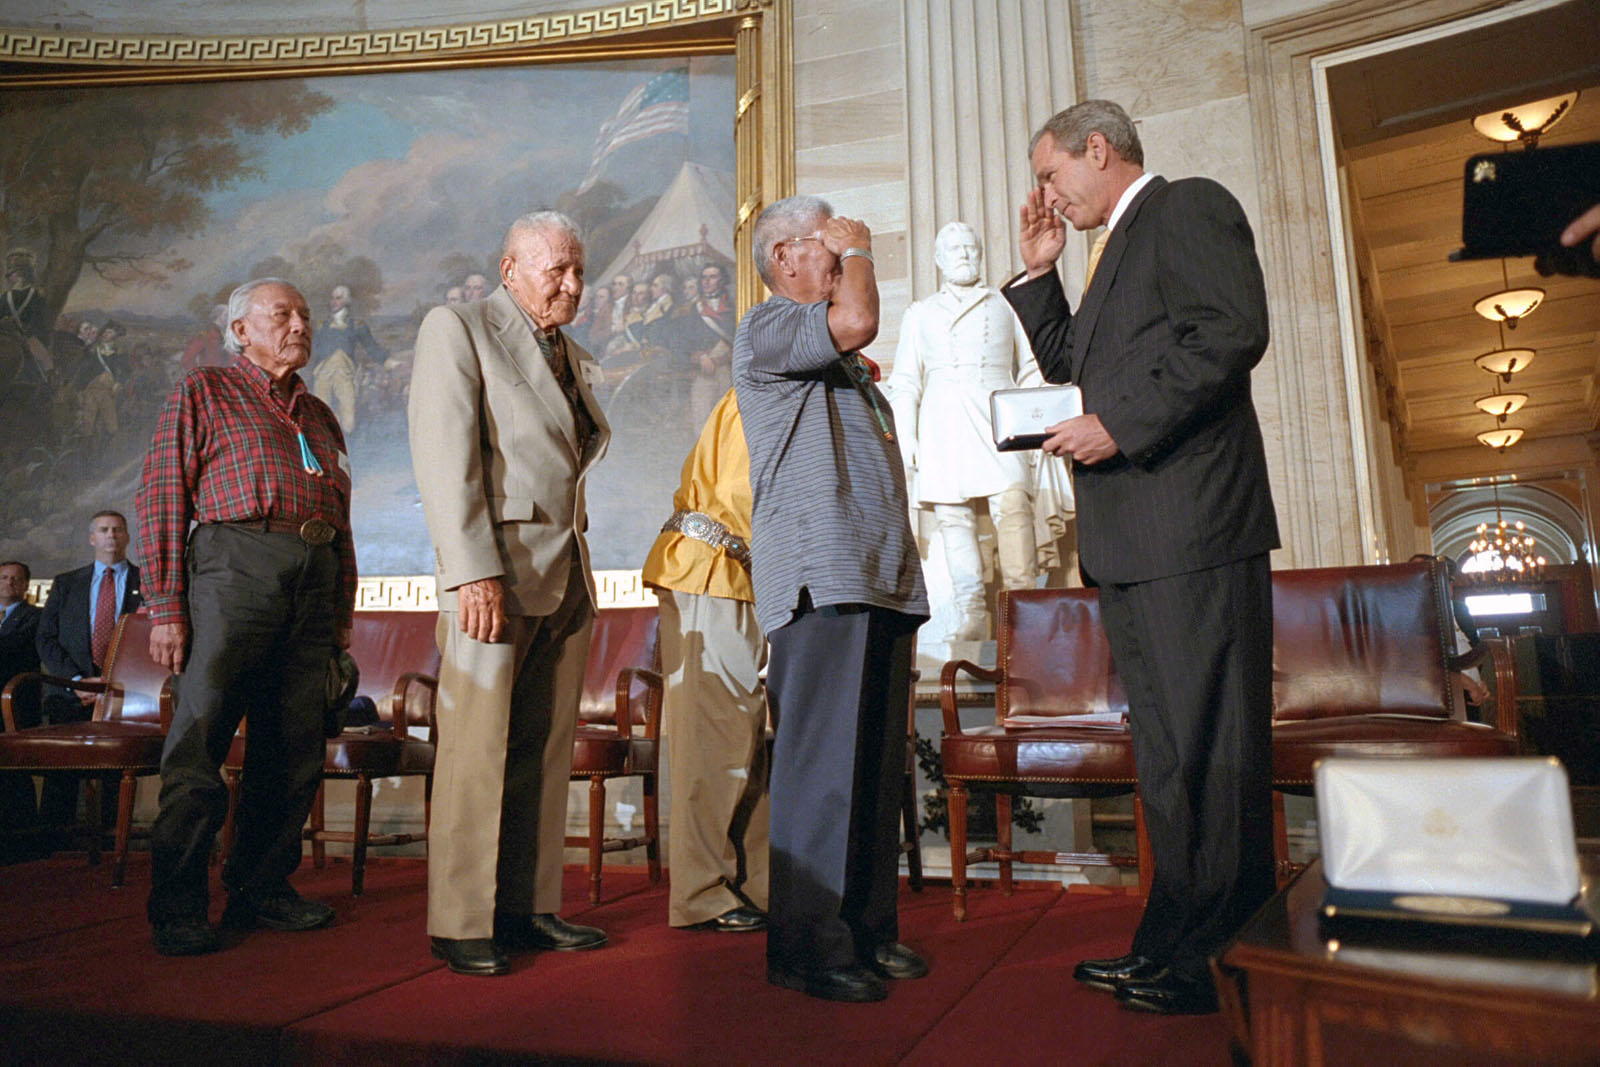 The last original code talkers John Brown, Chester Nez, Lloyd Oliver, and Allen Dale June receive their medals from President Bush in 2001. (Photo source: https://americanindian.si.edu/nk360/code-talkers/recognition/)